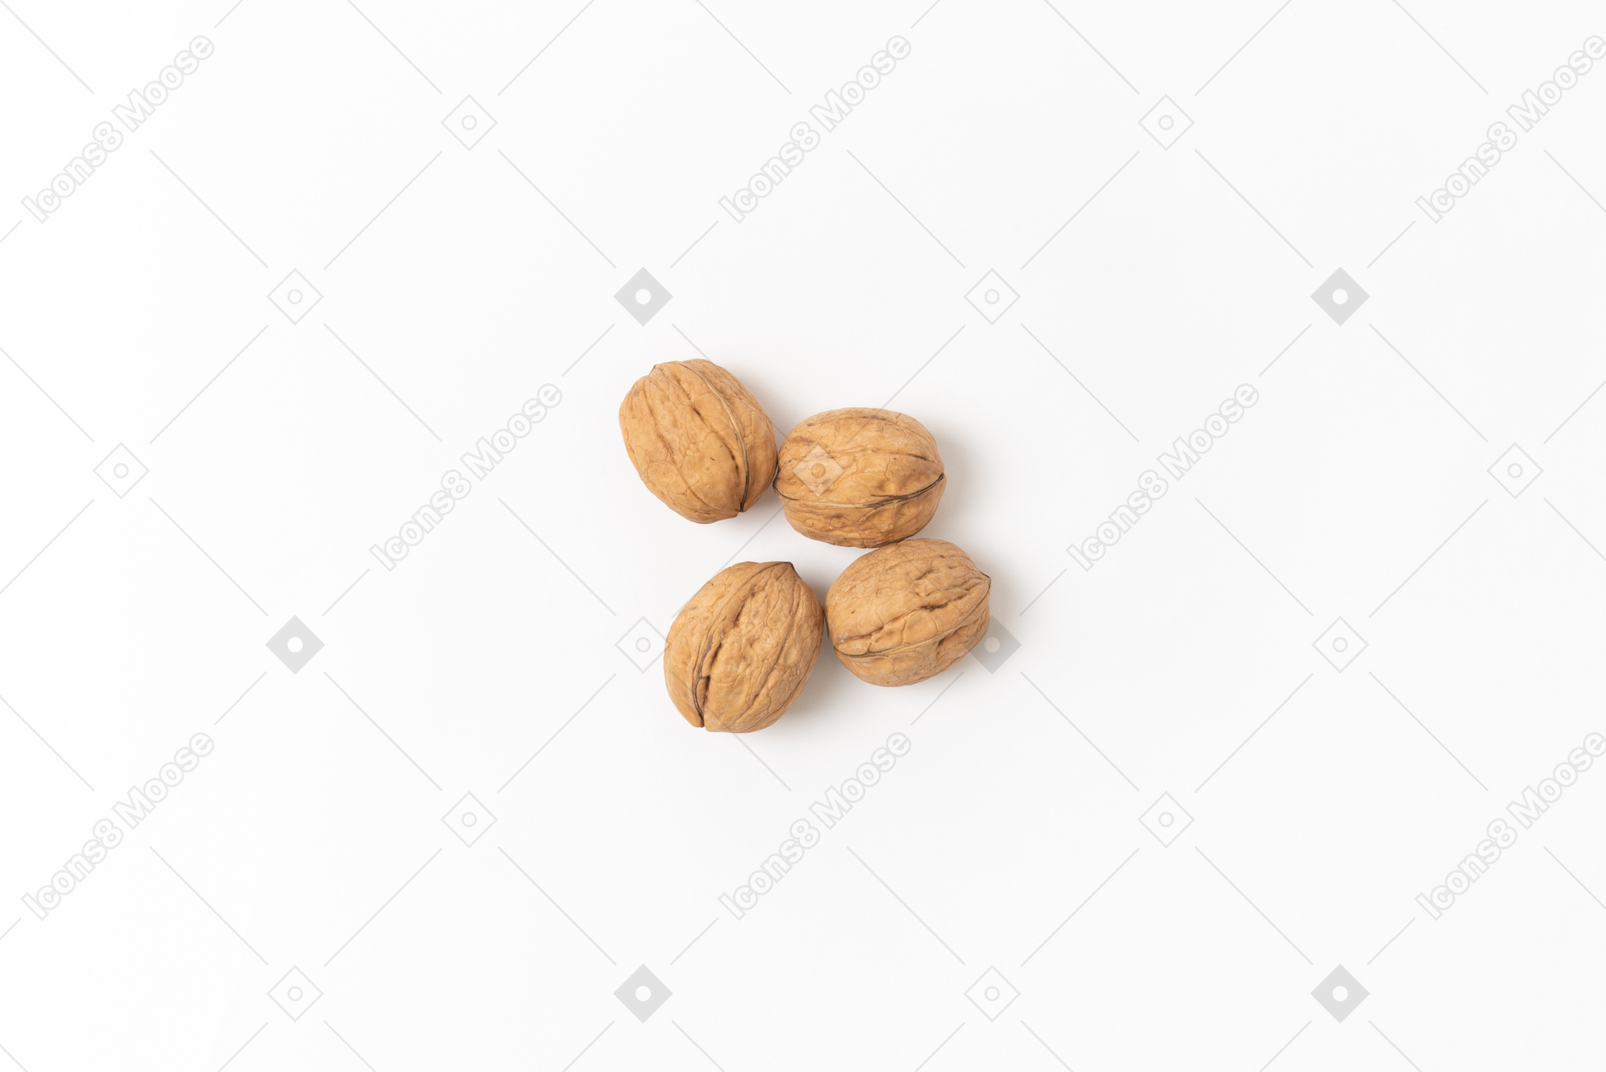 A walnut a day could solve a lot of issues